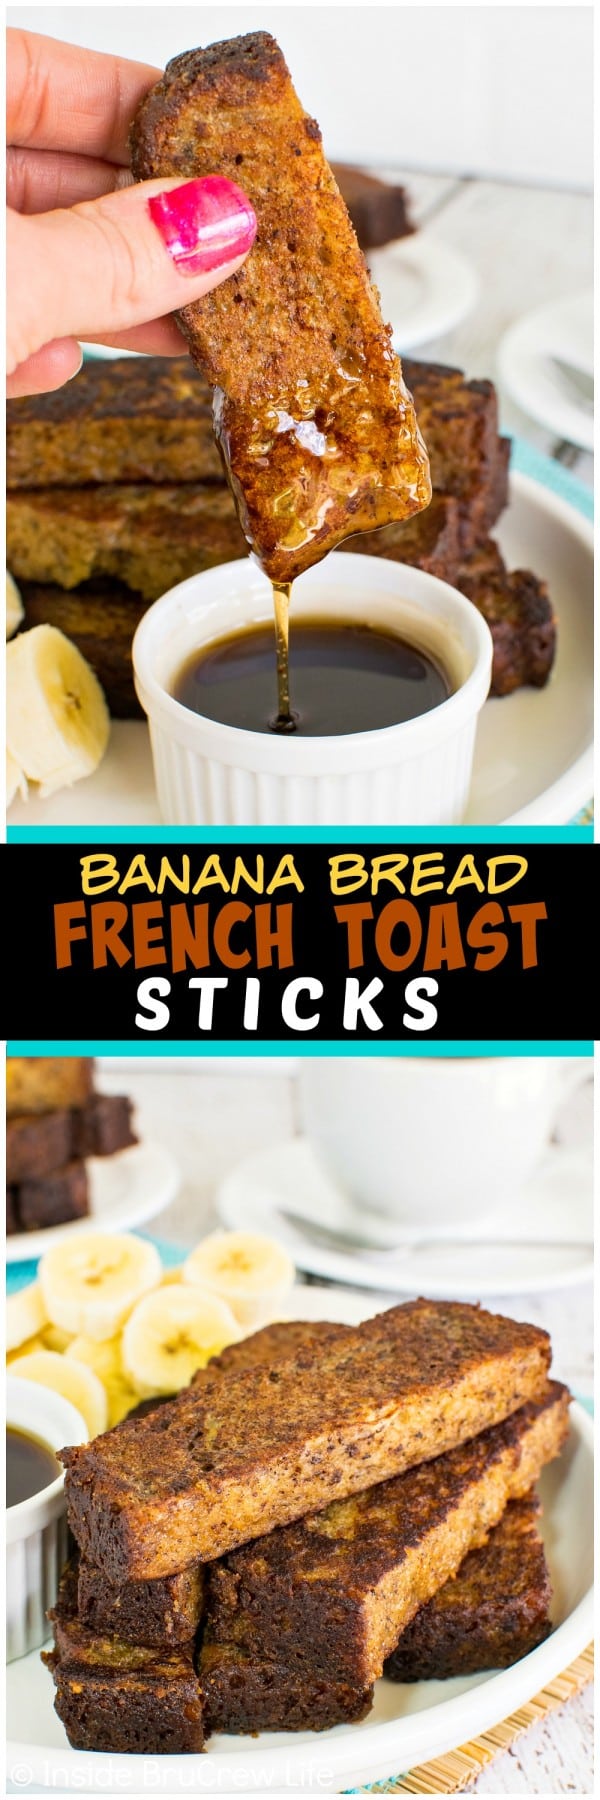 Banana Bread French Toast Sticks - use your favorite banana bread to make these dunkable breakfast treats. Freeze this recipe for busy mornings!